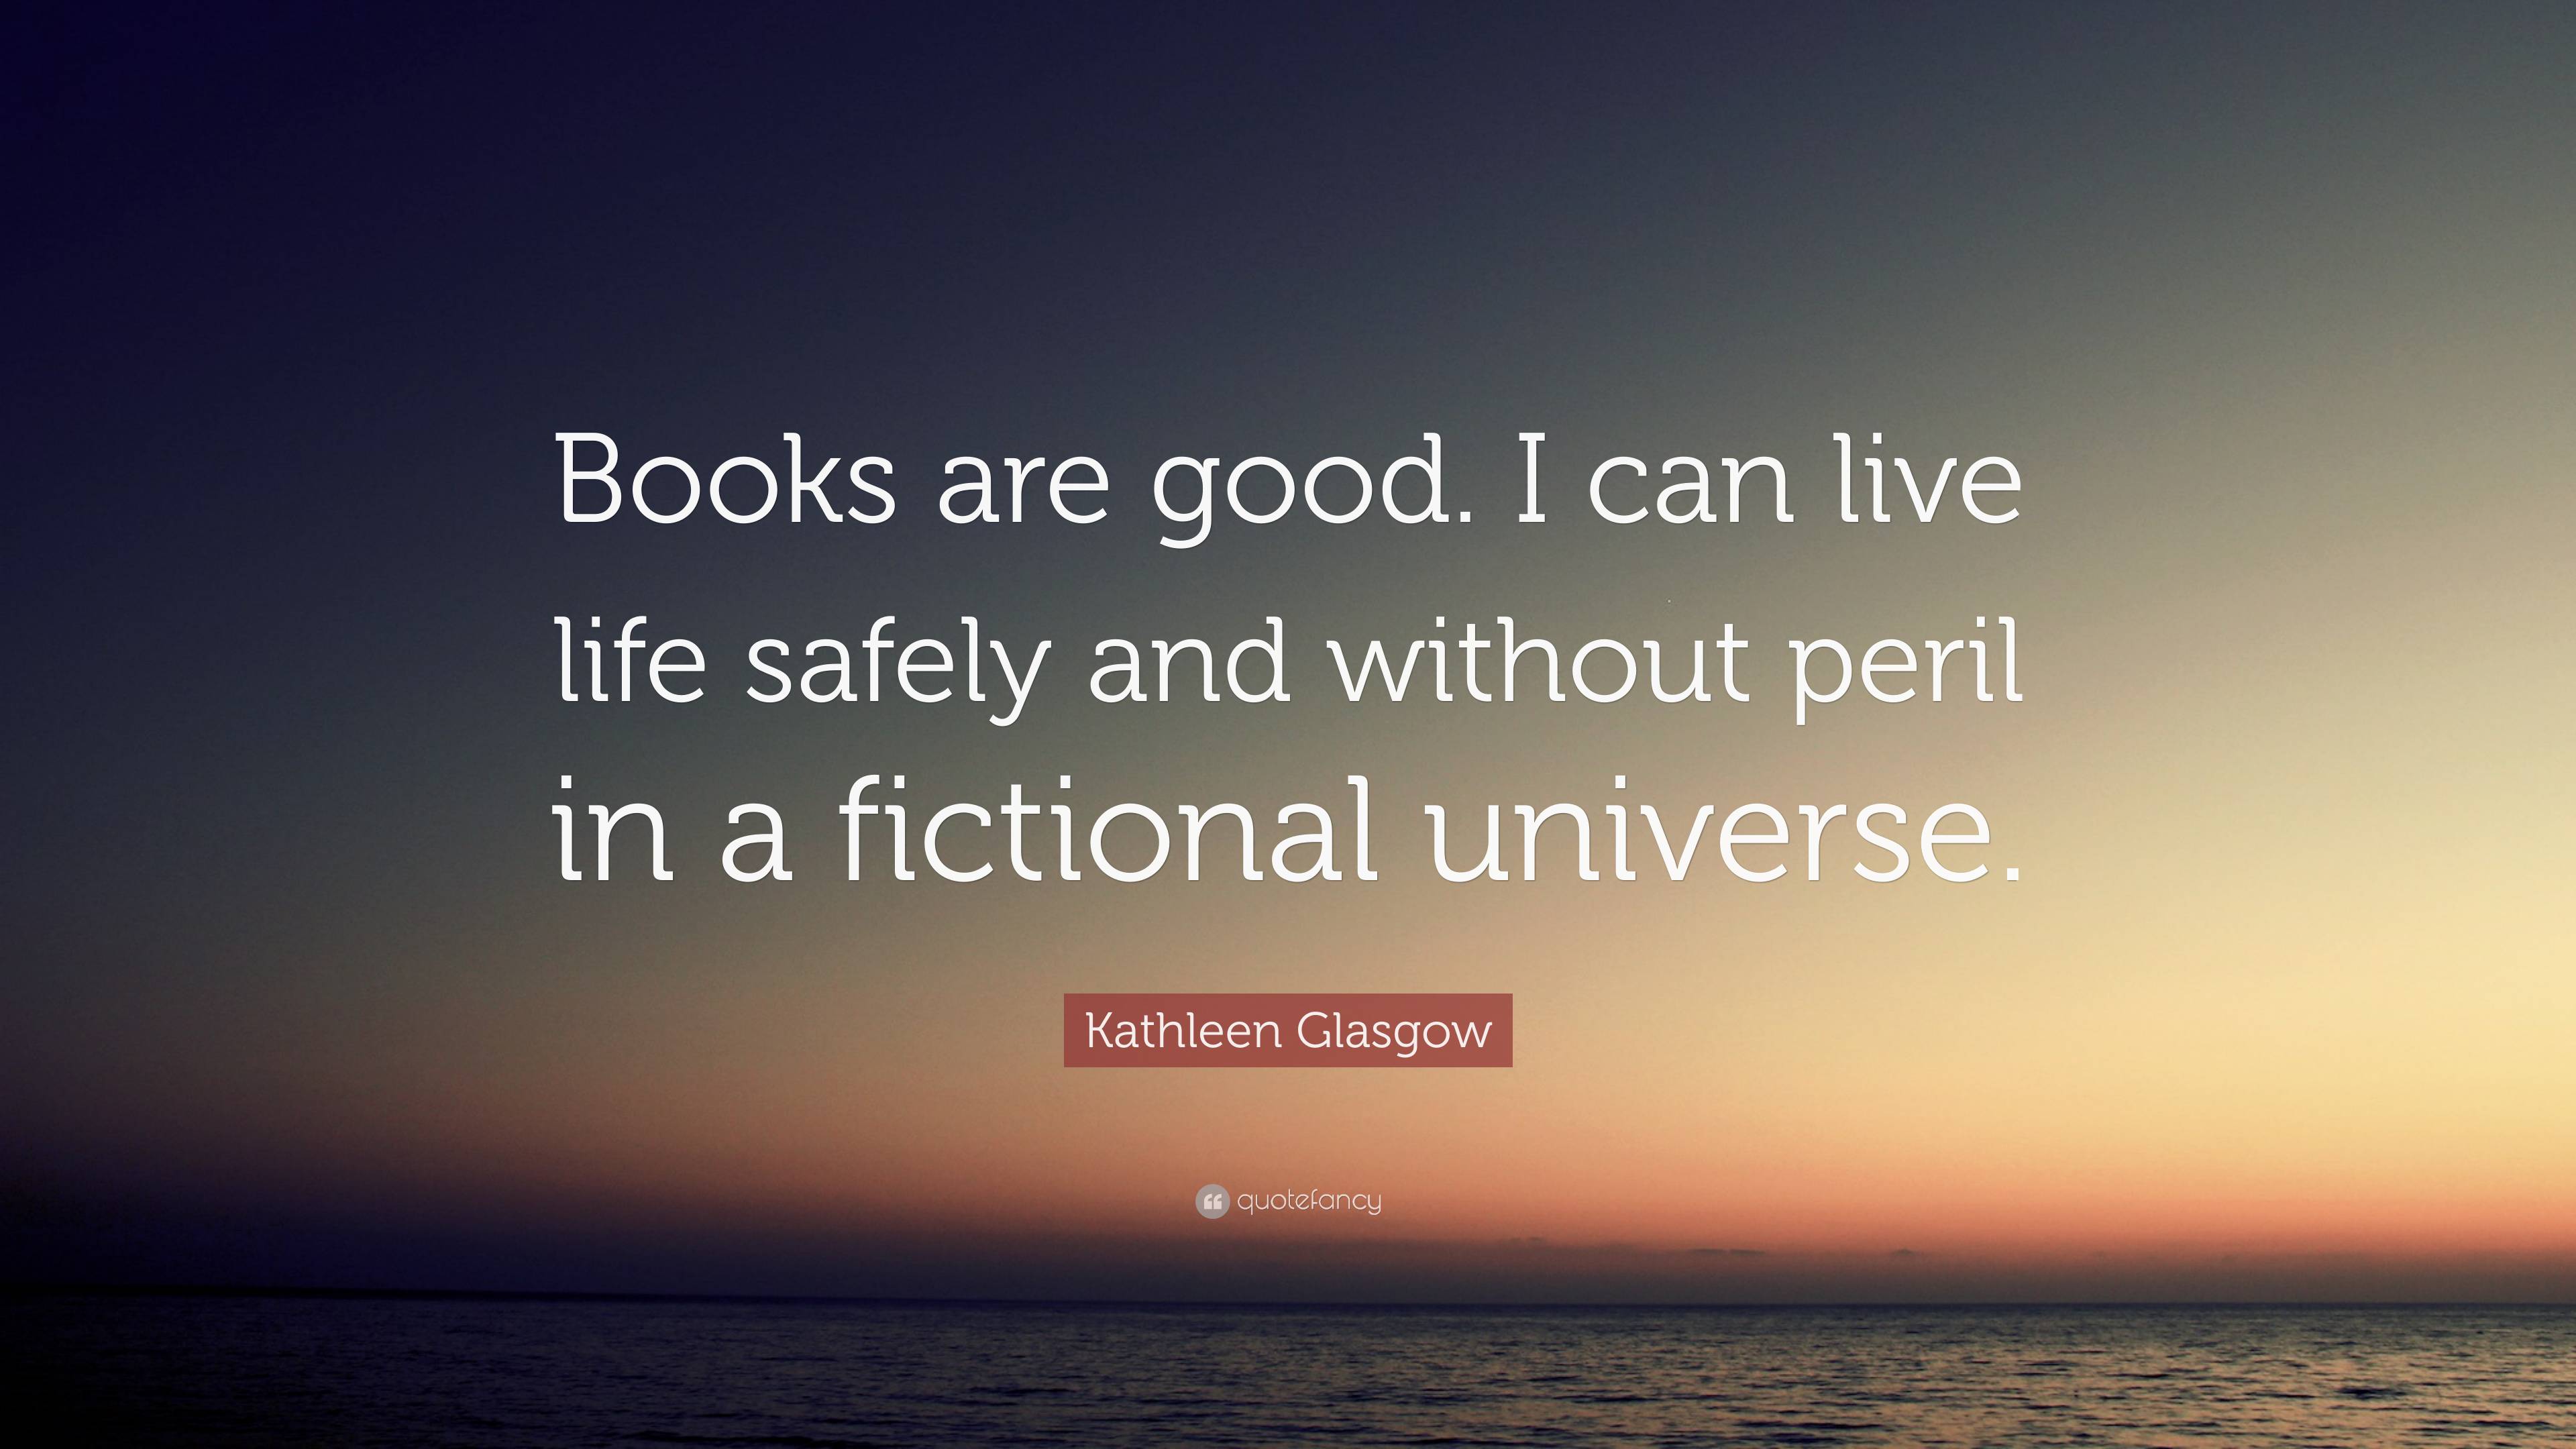 Kathleen Glasgow Quote: “Books are good. I can live life safely and ...